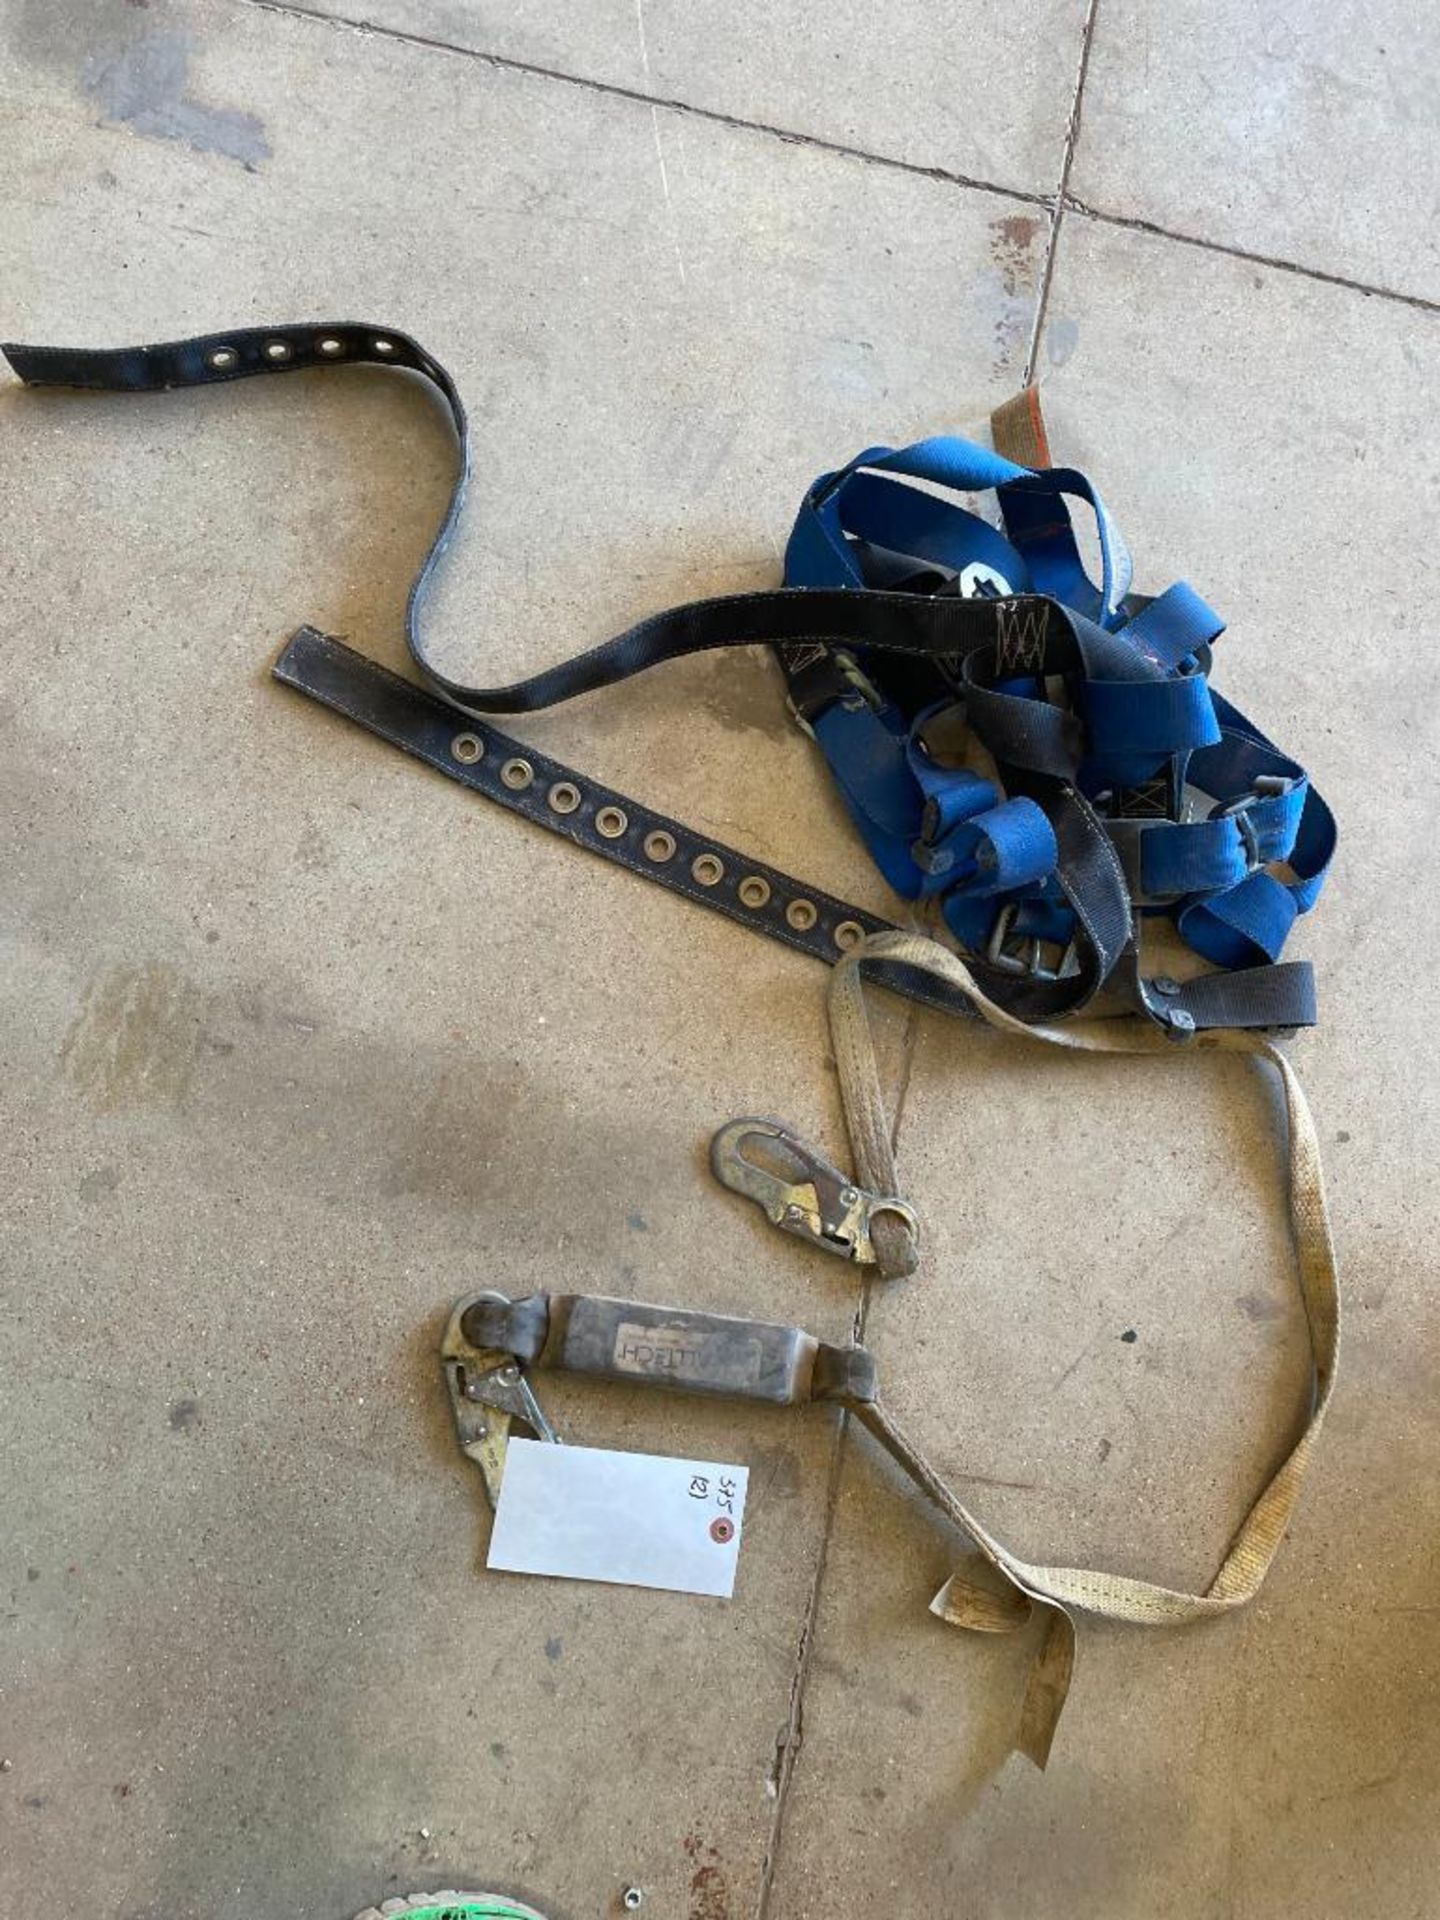 (2) FallTech Full Body Harnesses. Located in Hazelwood, MO